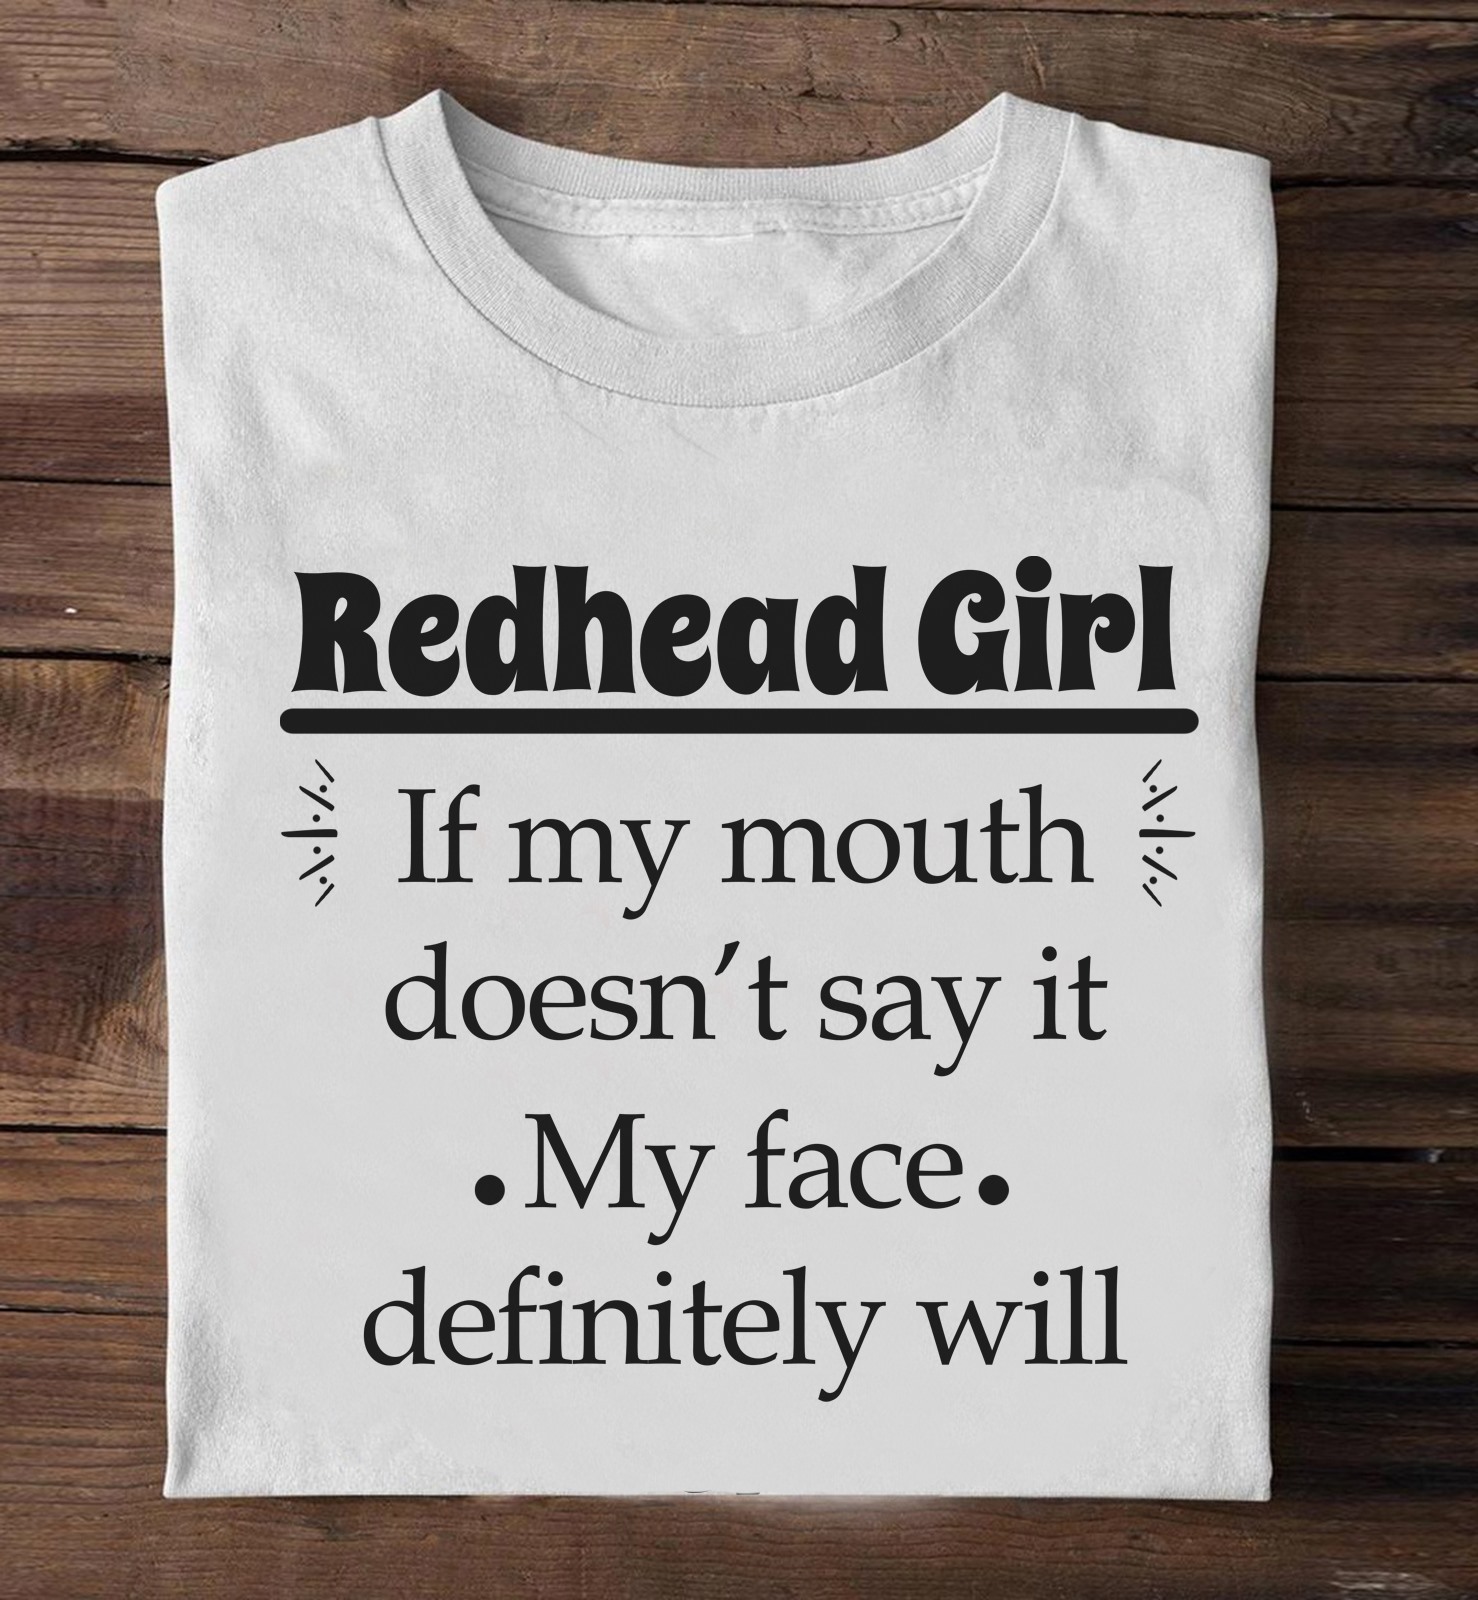 Redhead girl if my mouth doesn't say it my face definitely will